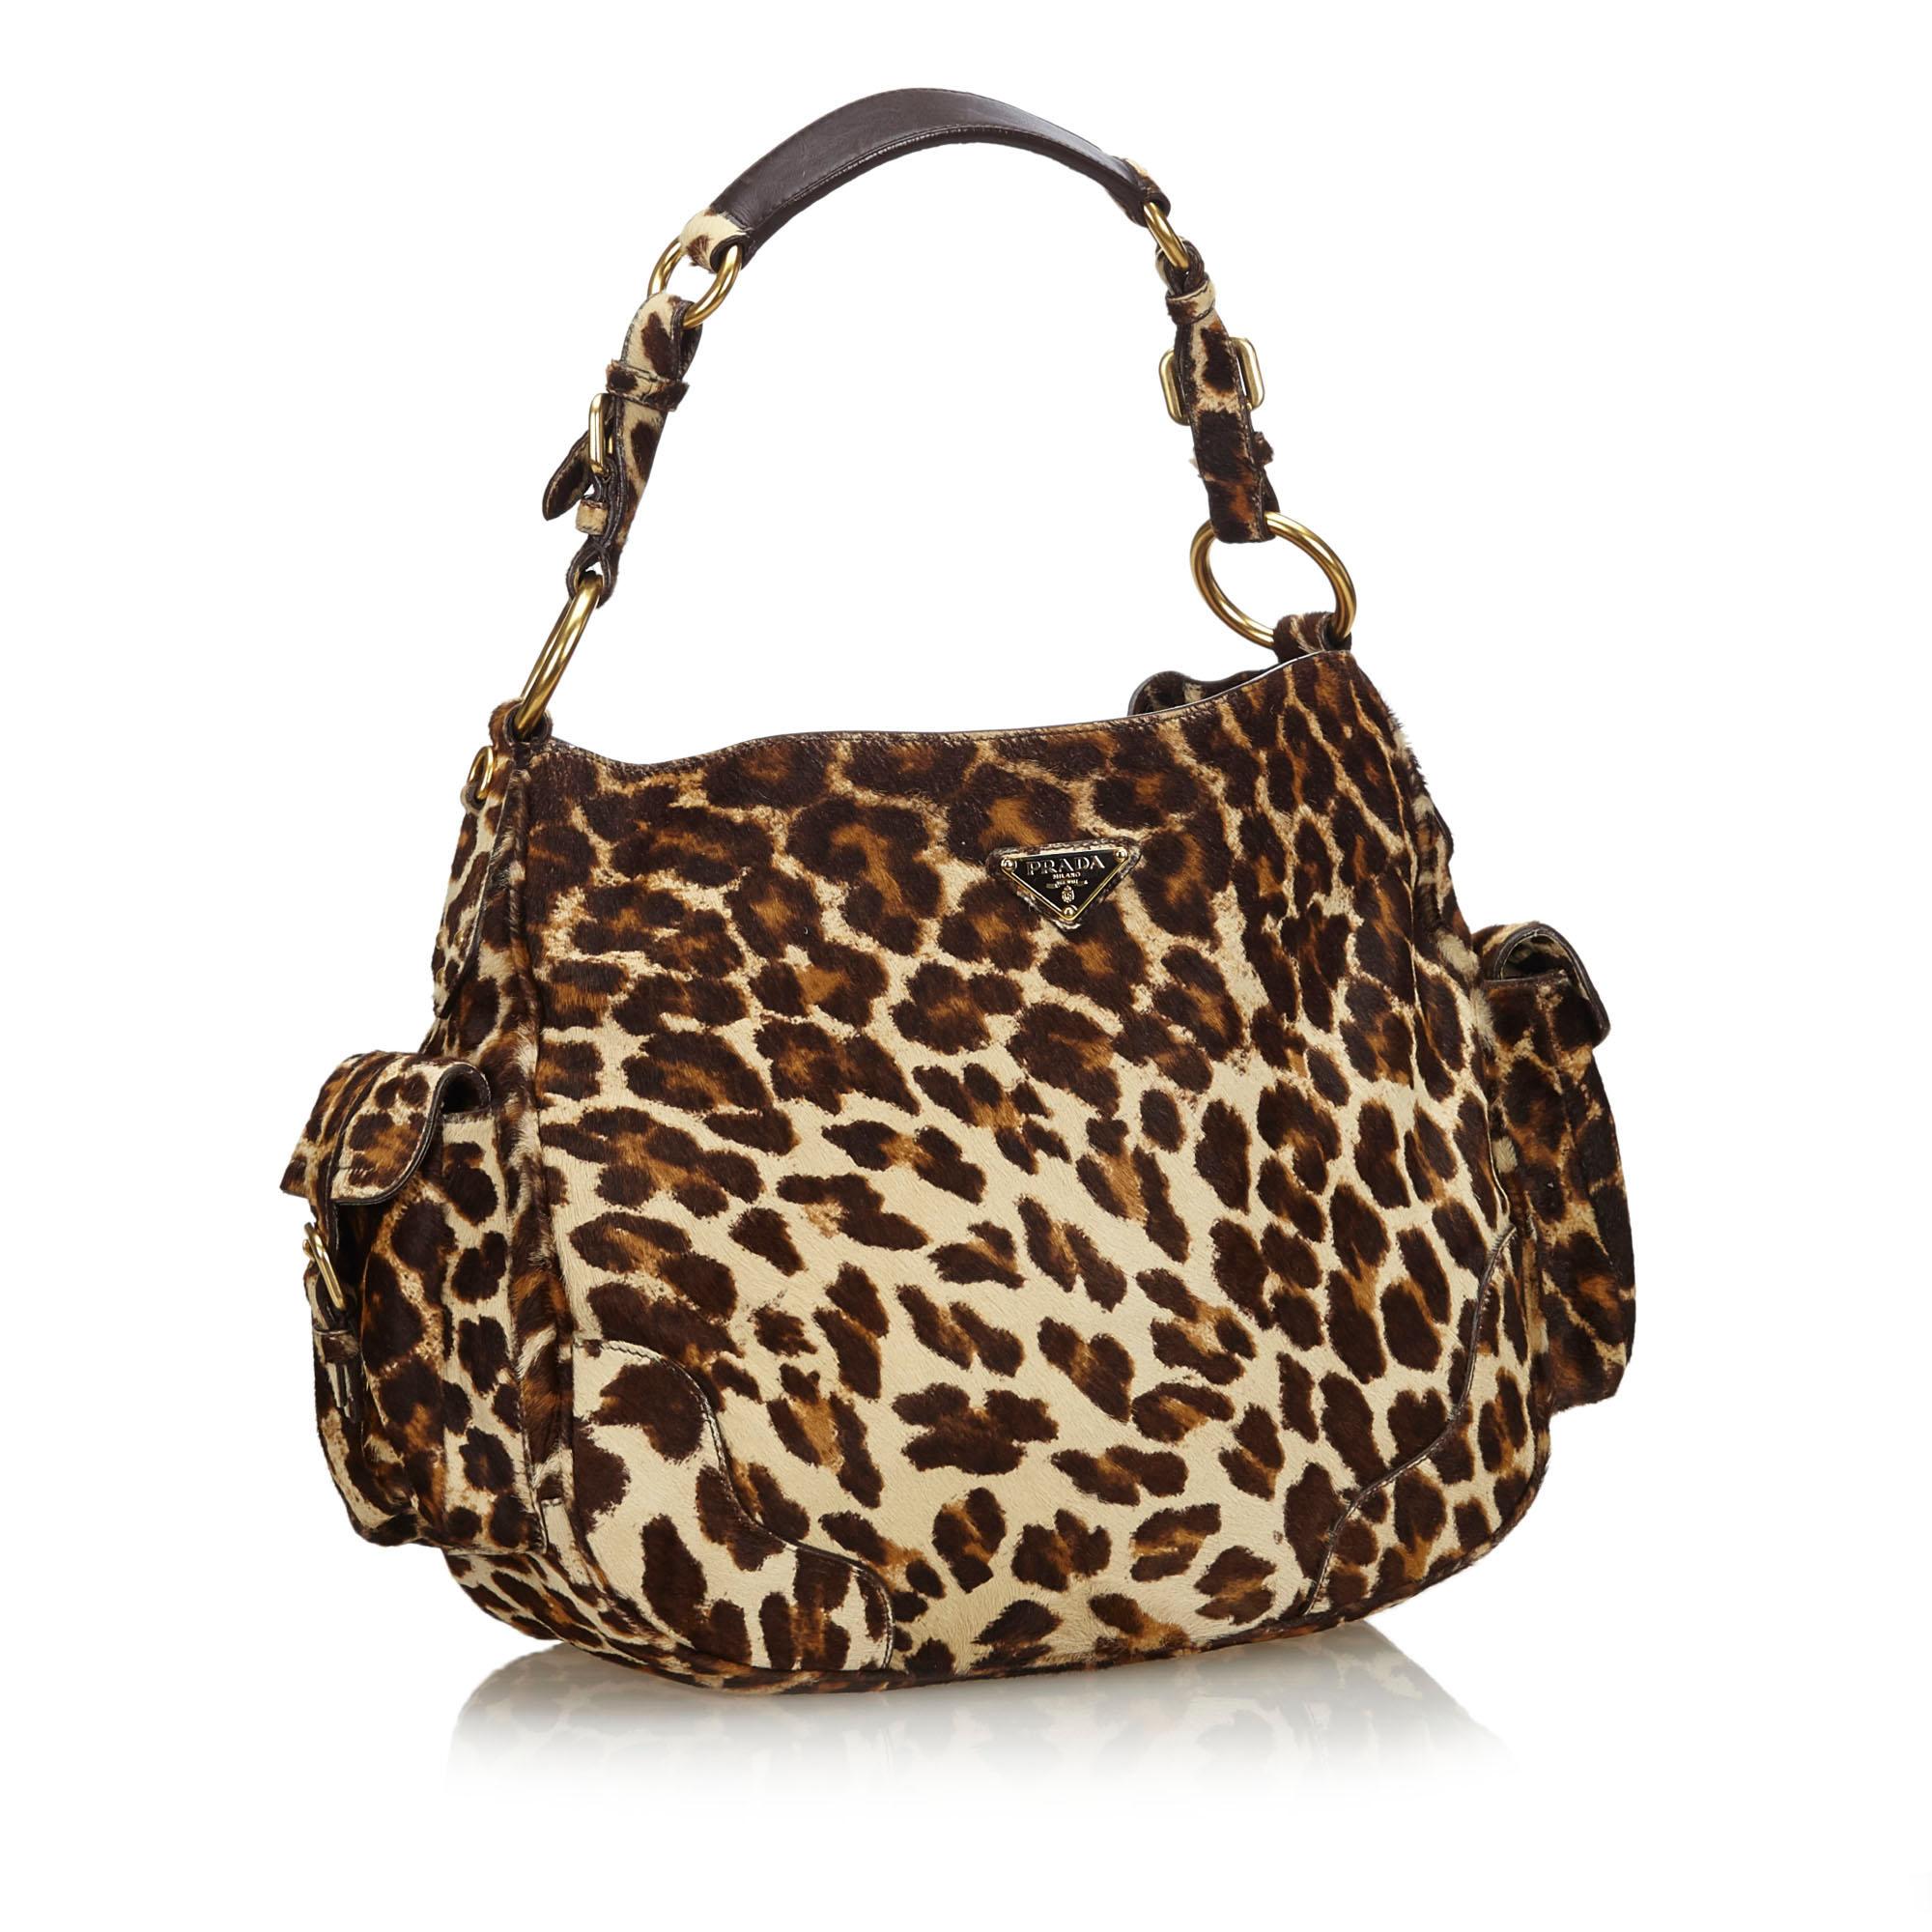 This shoulder bag features a leopard print pony hair body, side exterior flap pockets, a flat strap, an open top with a magnetic snap button closure, and interior zip and slip pockets. It carries as AB condition rating.

Inclusions: 
This item does